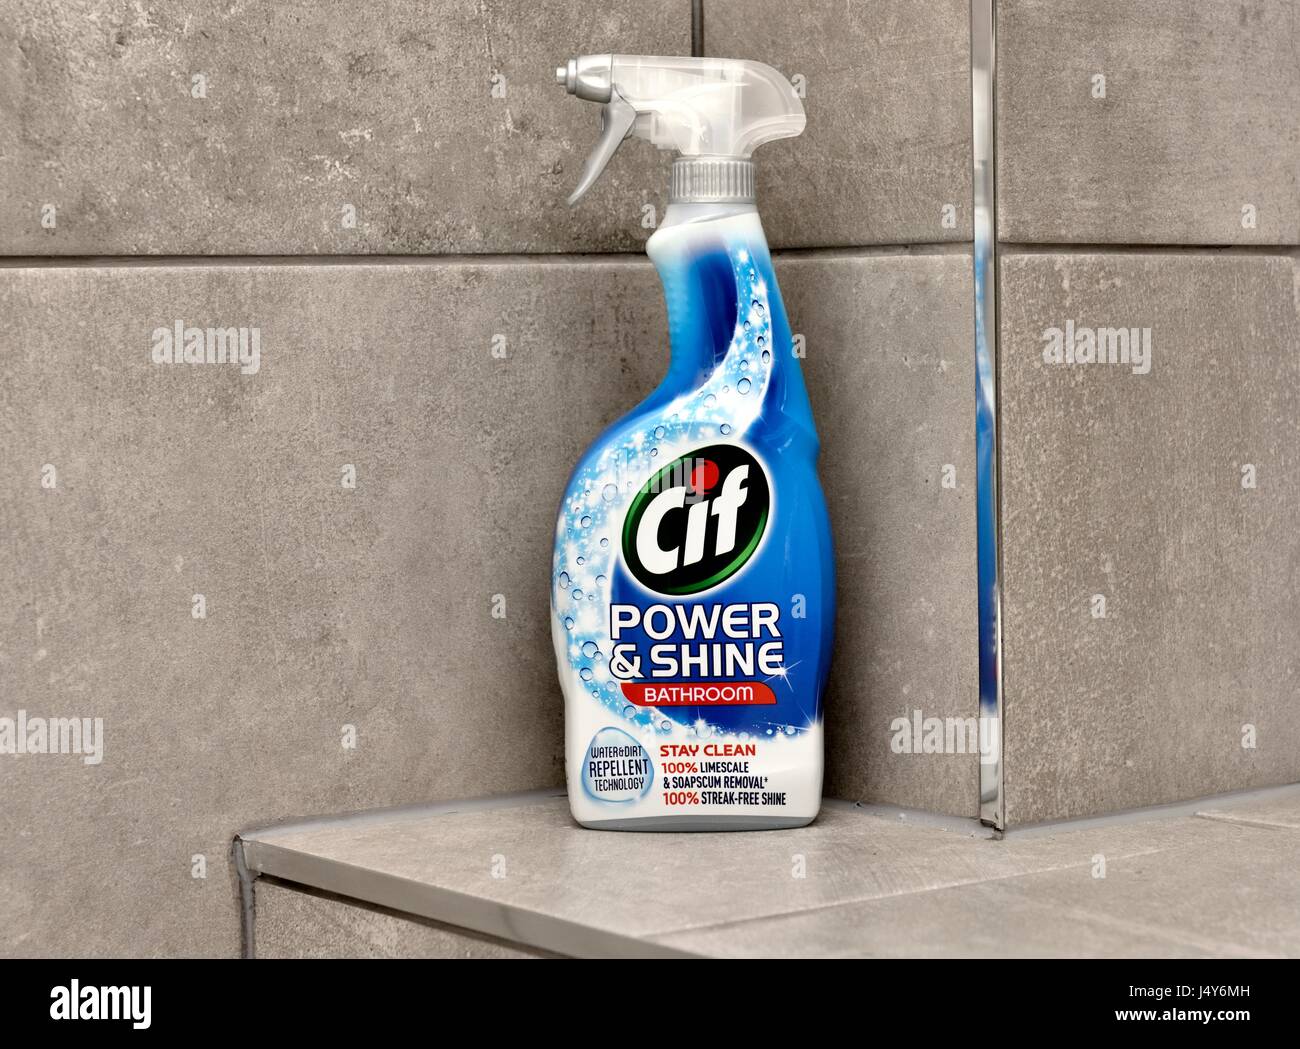 Cif power and shine bathroom cleaner Stock Photo